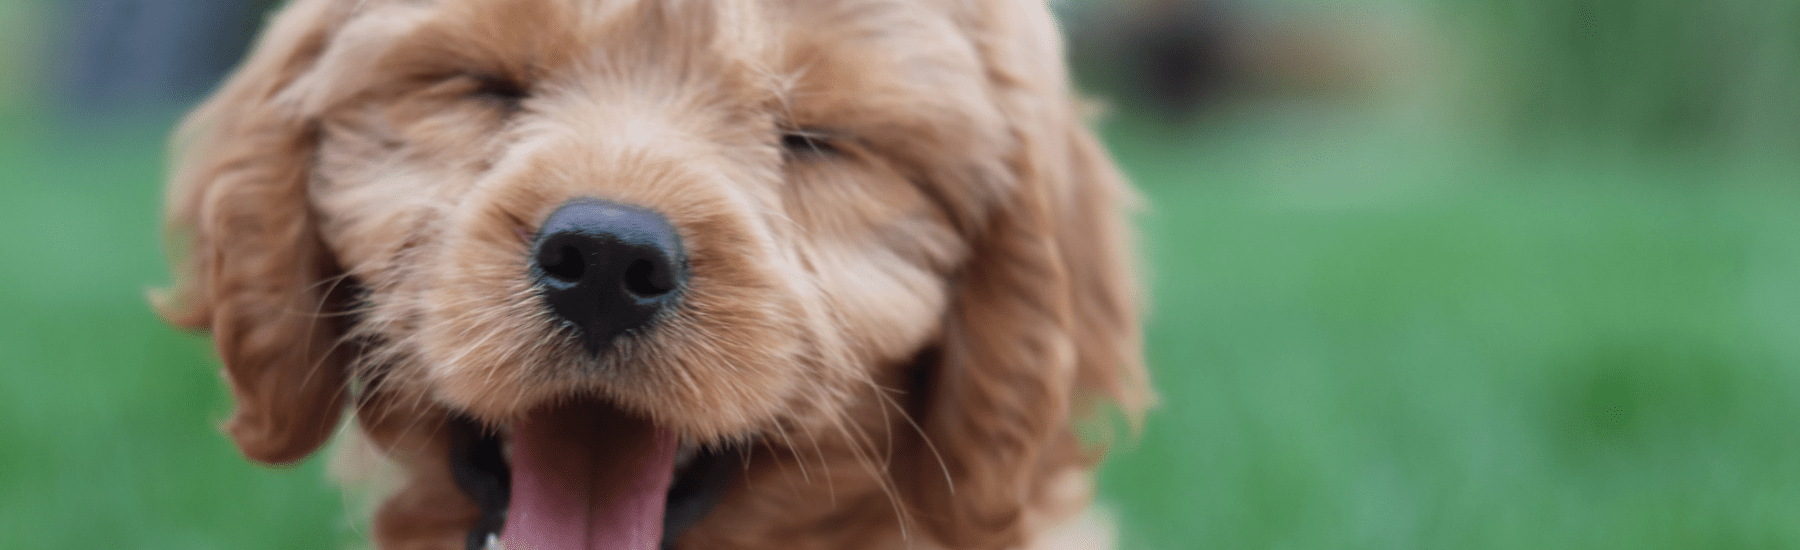 Puppy closing its eyes and opening its mouth